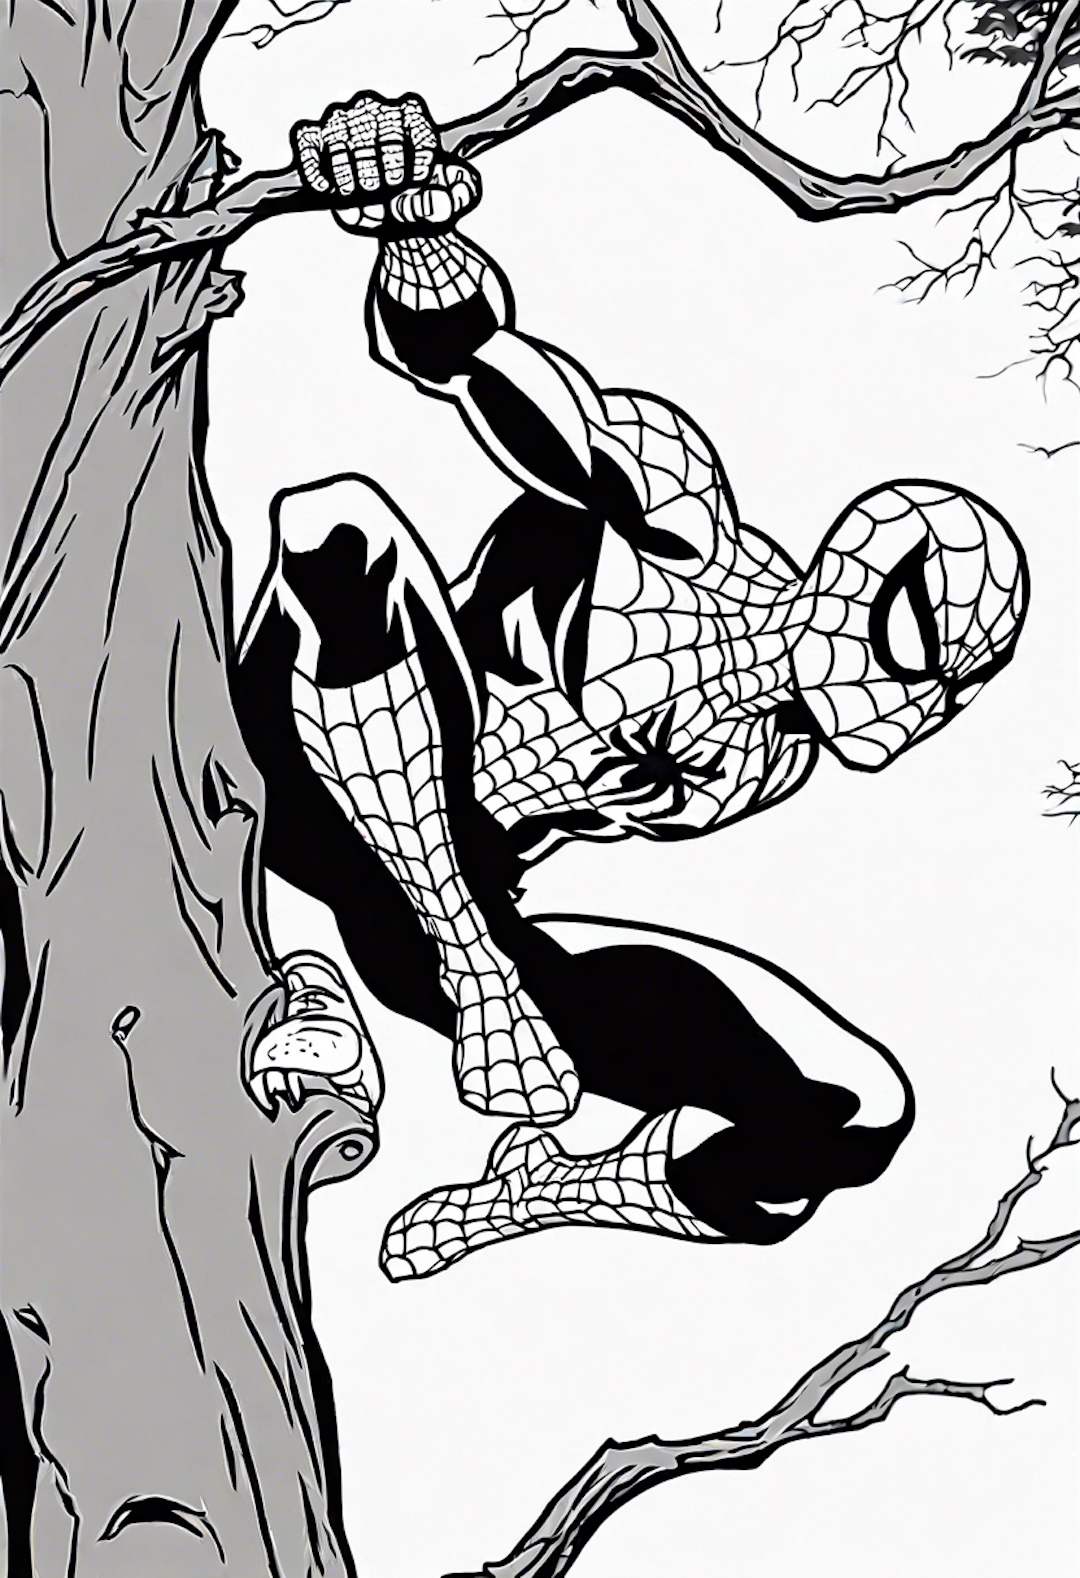 Spiderman Saving A Cat From A Tree